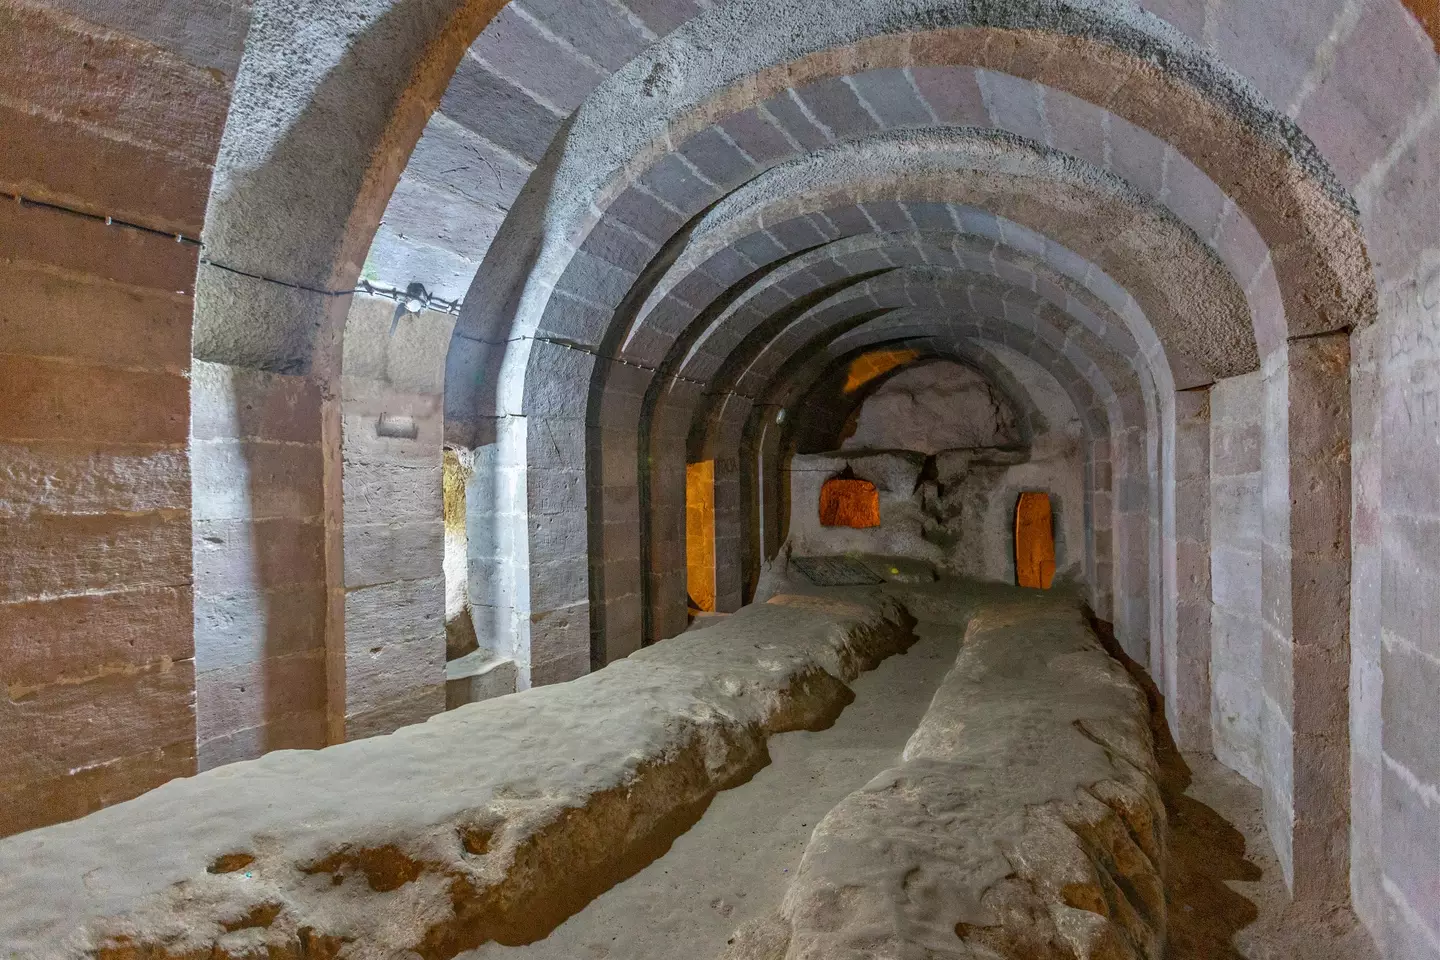 The underground city is now a tourist attraction, though it used to shelter thousands of people from invaders.